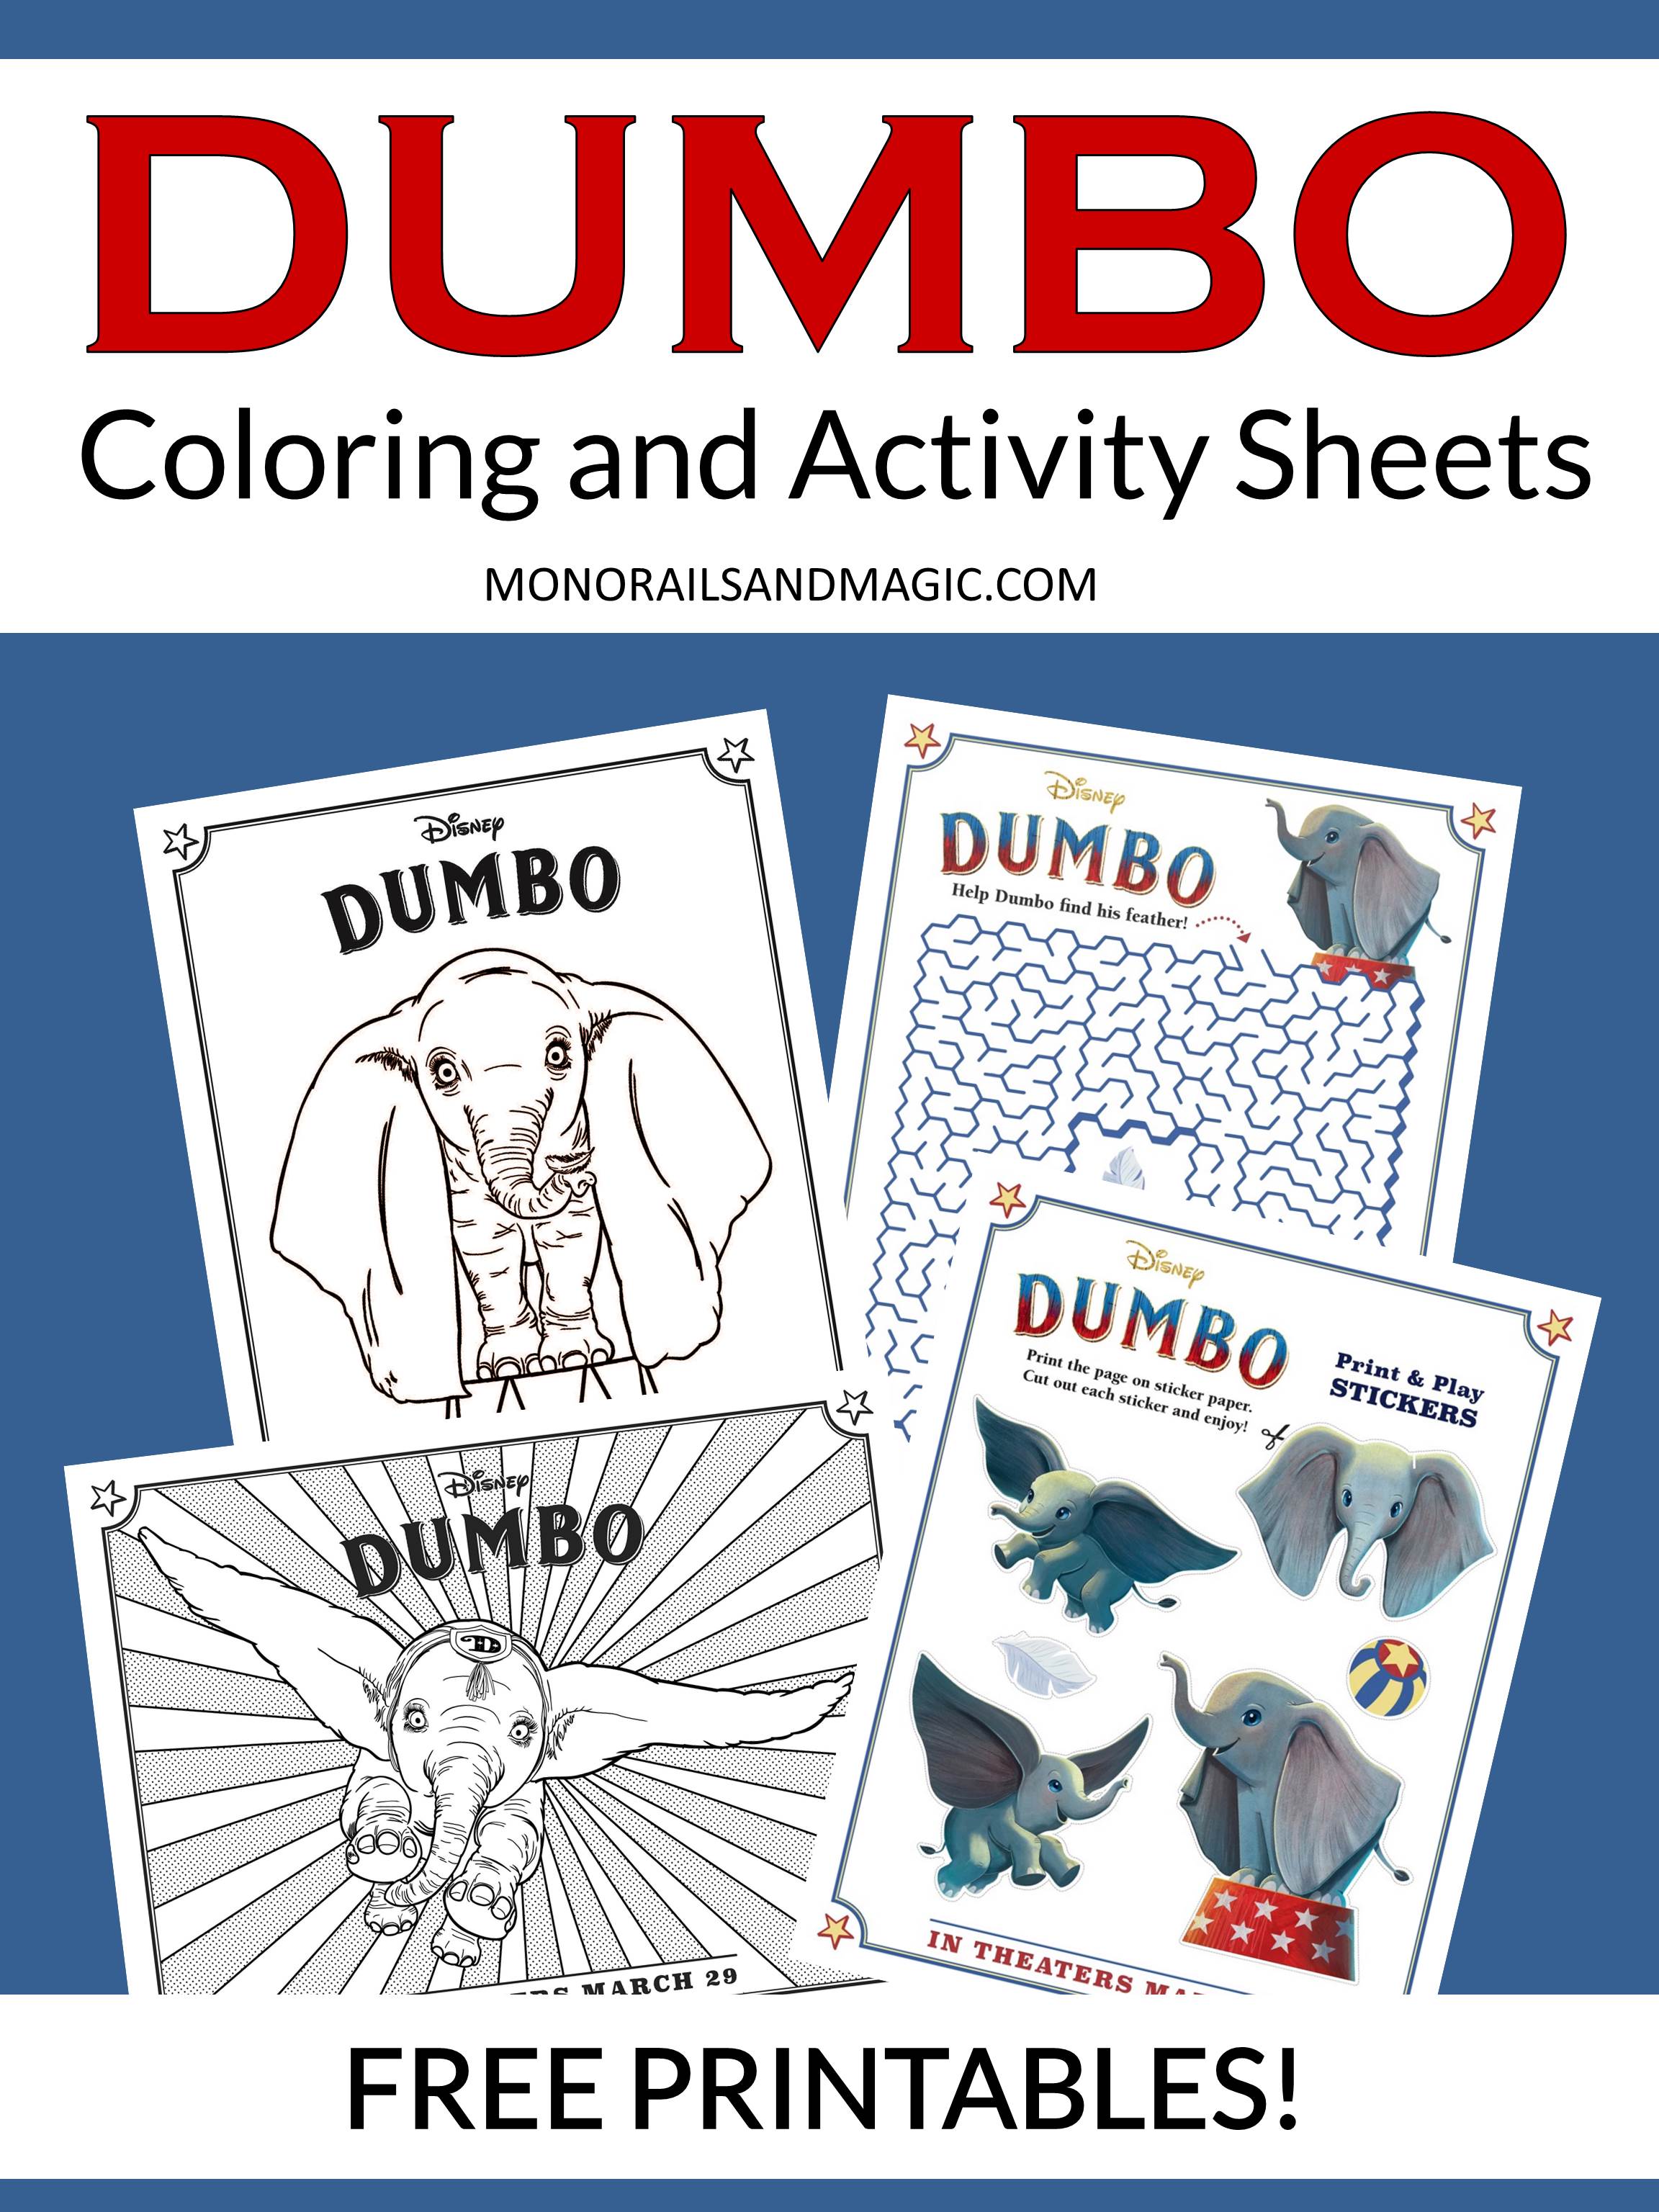 Dumbo Coloring and Activity Sheets Free Printables